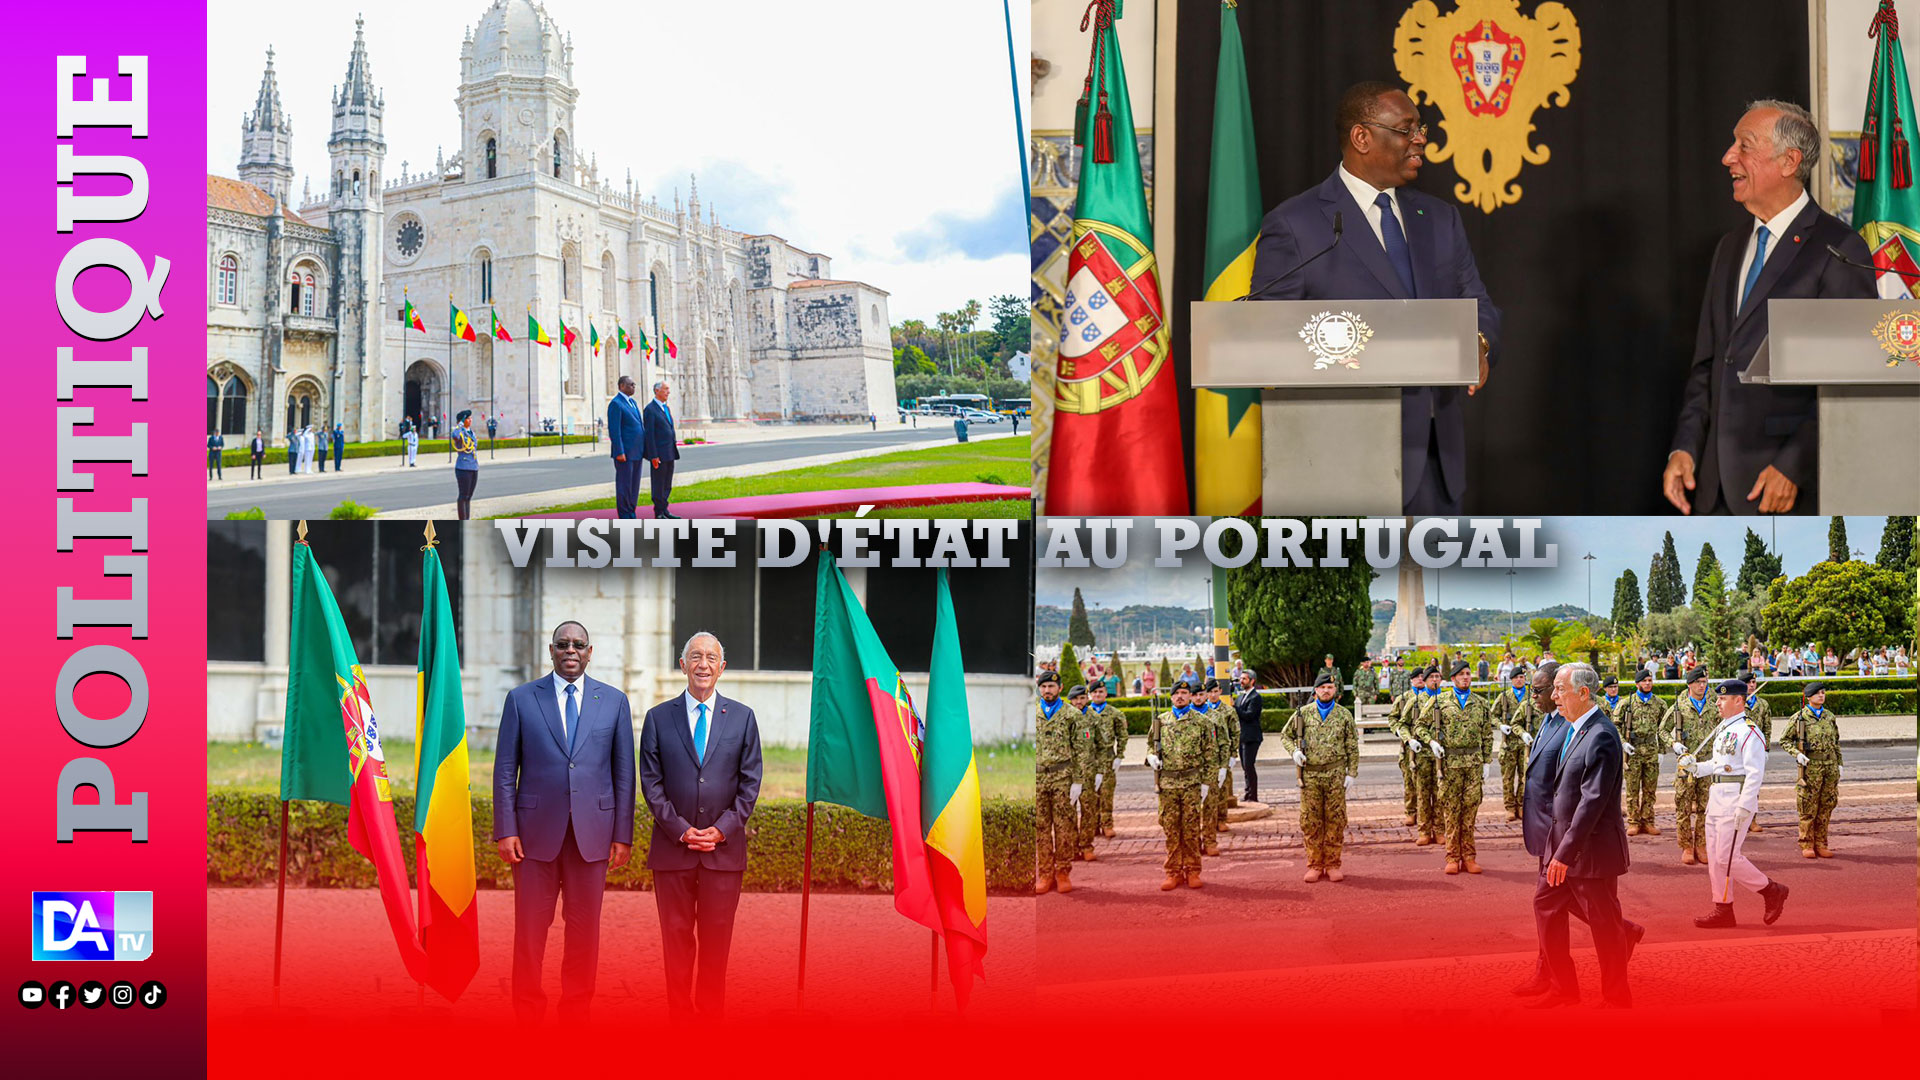 “Together, we want to do more and better to strengthen Senegalese-Portuguese friendship and cooperation” (Macky Sall)